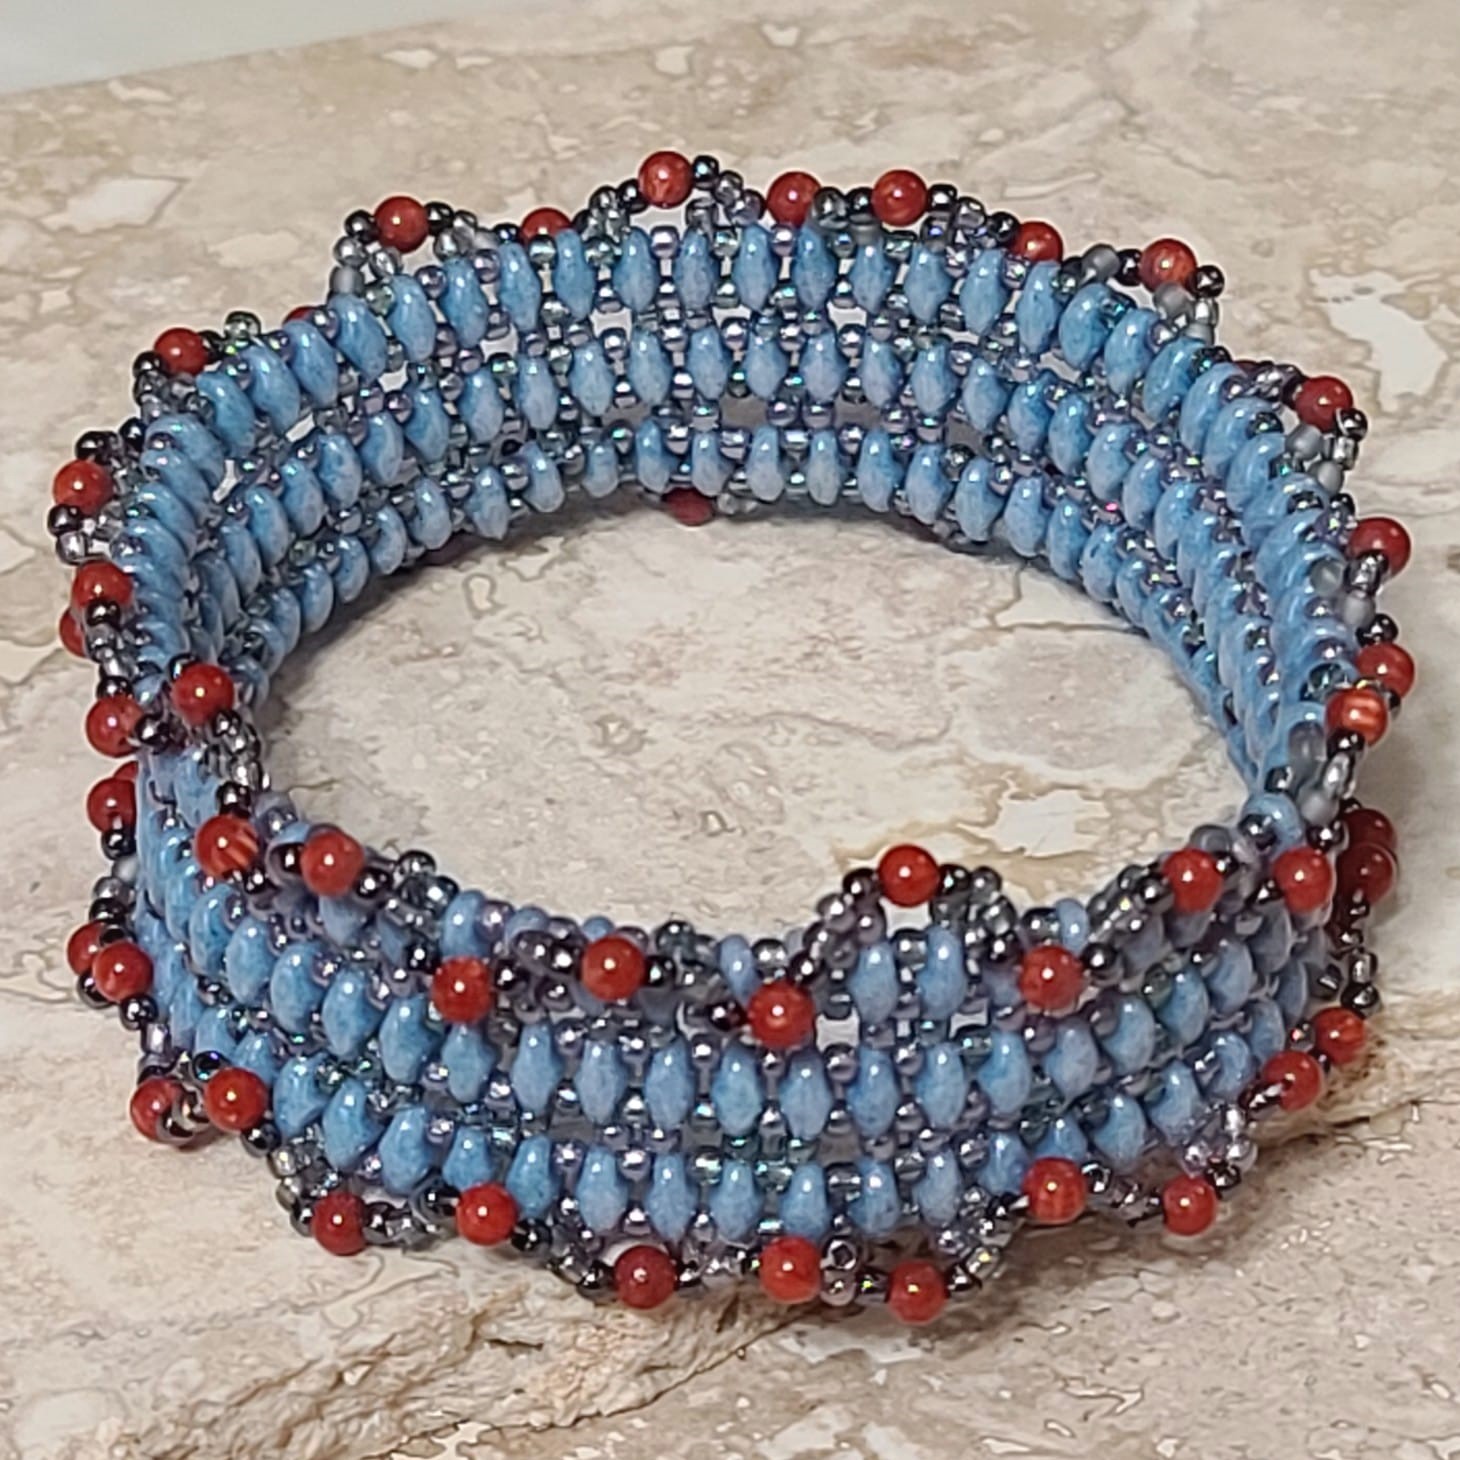 Bead Weaved 3 Row Bangle Braclet with Coral Gem Ruffled Edge